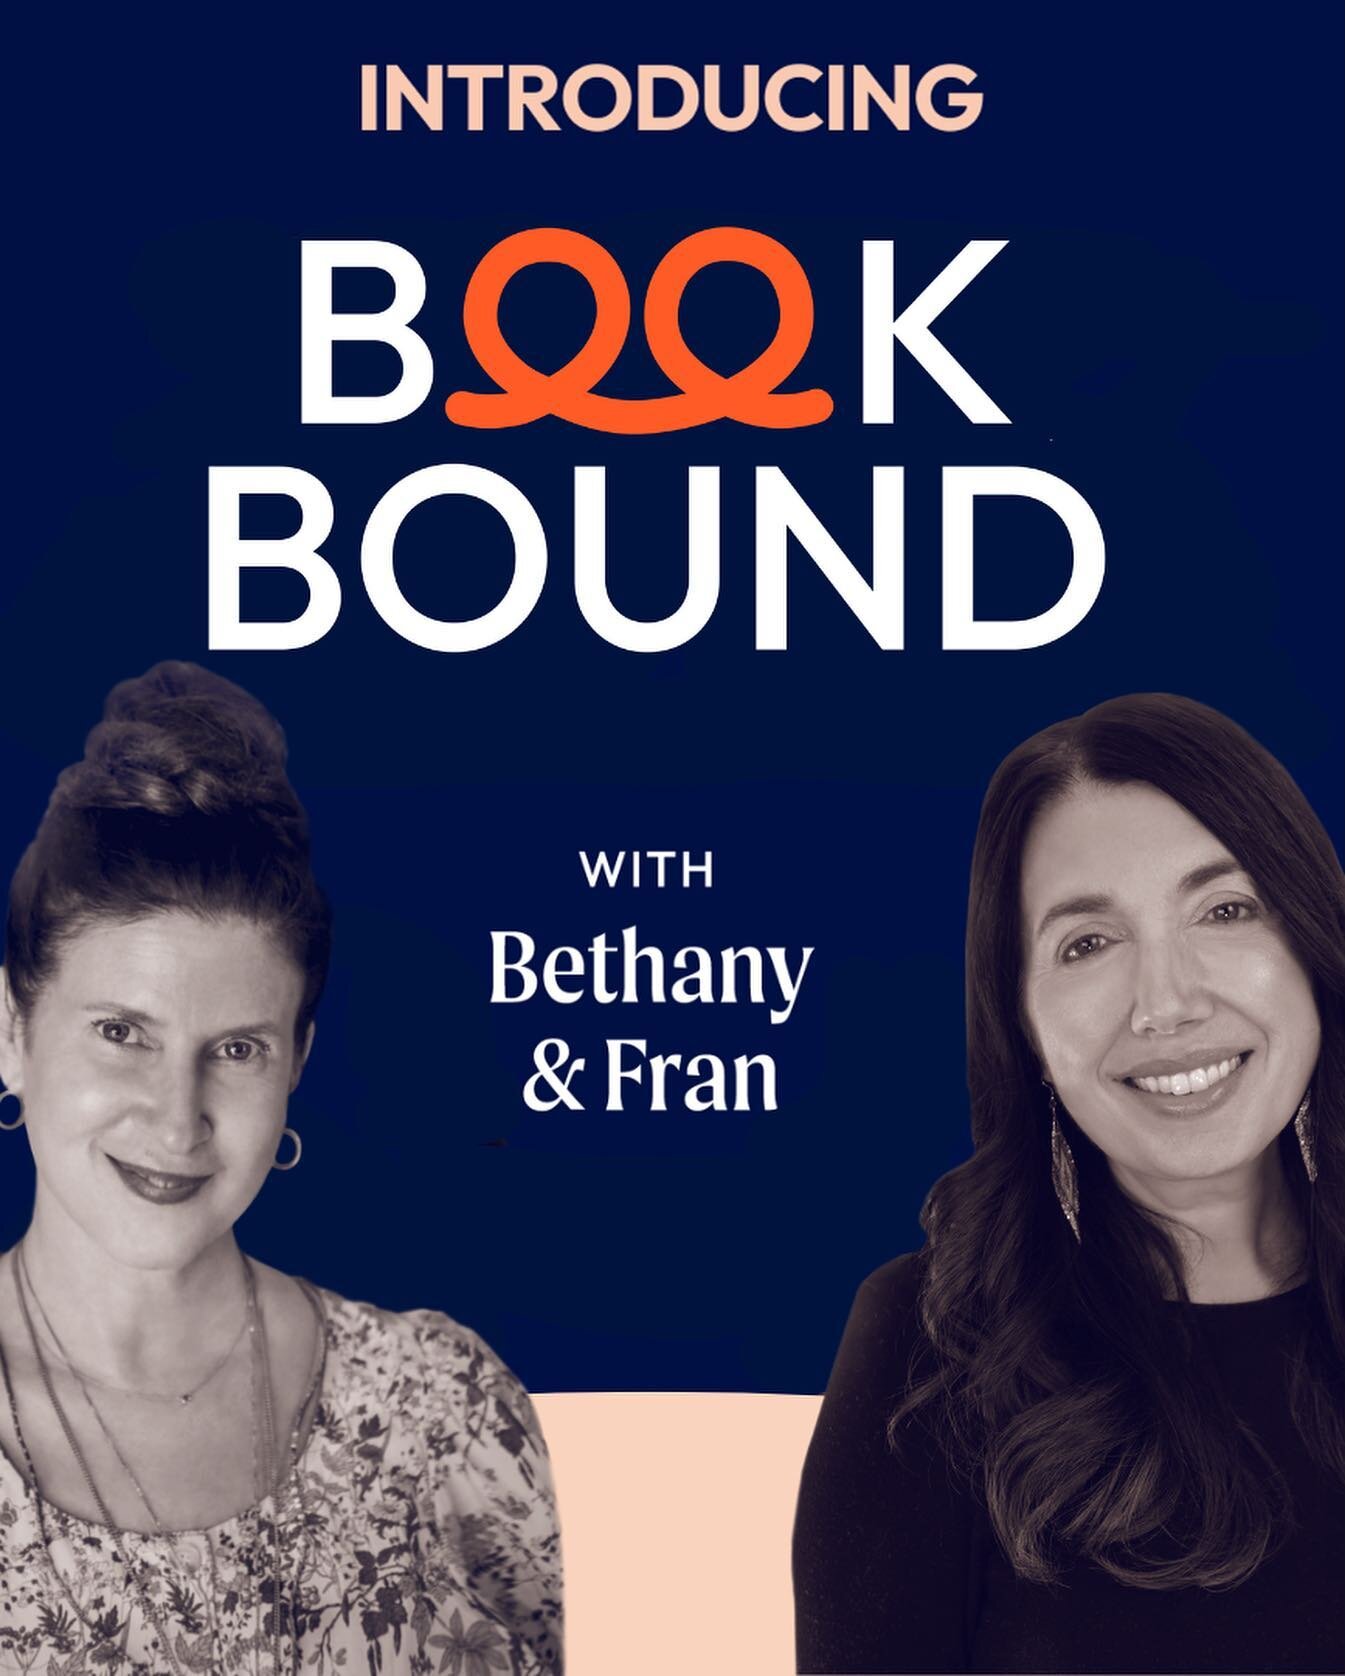 💡 BIG BOOKISH NEWS!

I&rsquo;m thrilled to share that the Bookbound: The Podcast has officially launched, and I&rsquo;m honored to be part of this exciting project alongside the incredible @fran_hauser. 

Our podcast, created in partnership with the